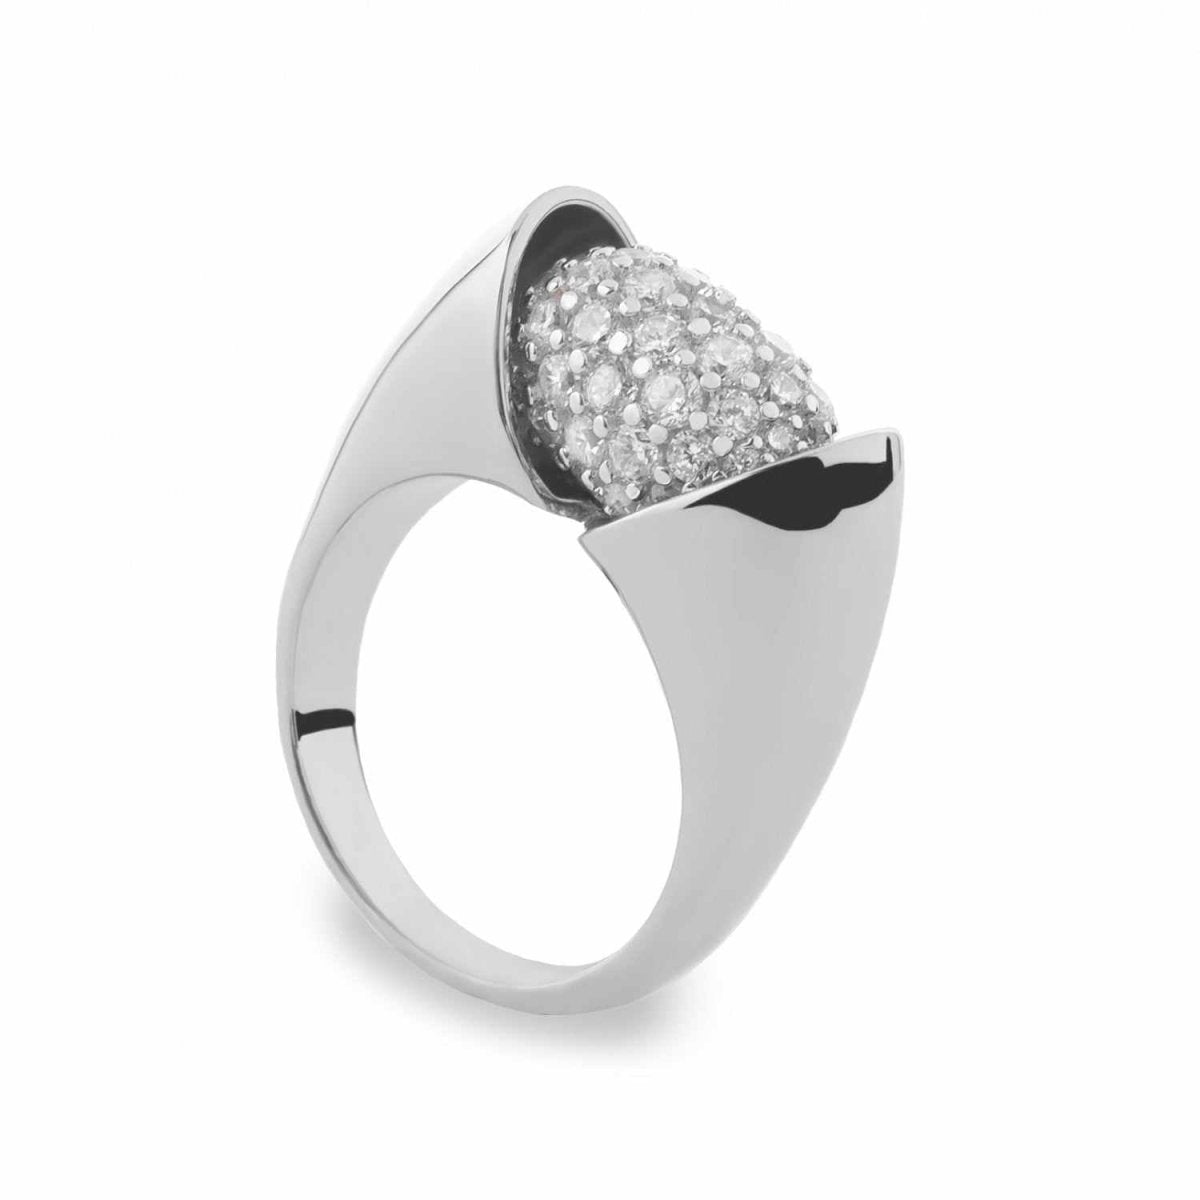 Ring - Rings - White zirconia rings open brilliant and plain silver design